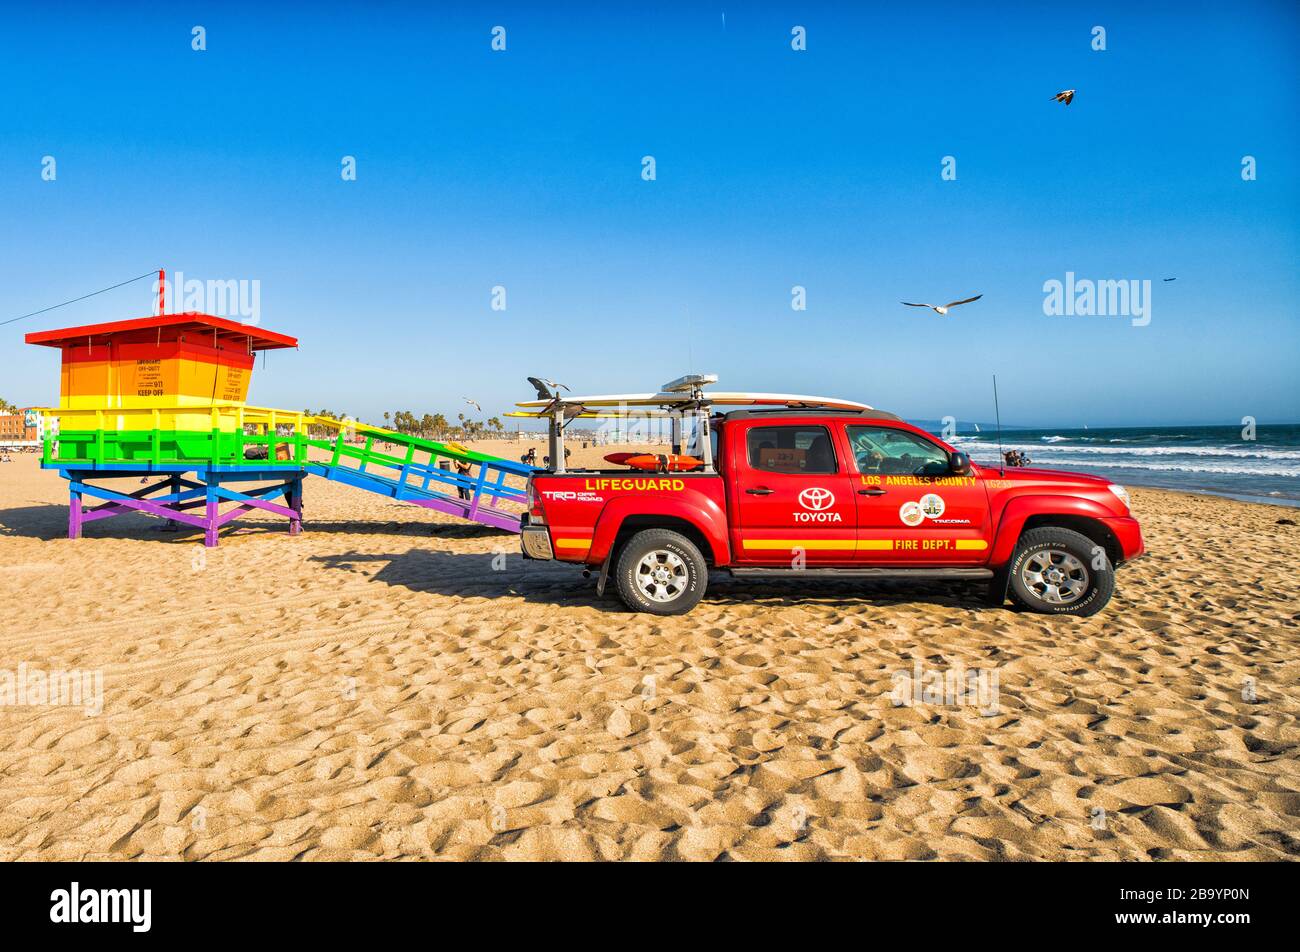 Venice Pride Lifeguard station and car at Los angeles - Venice Beach Stock Photo